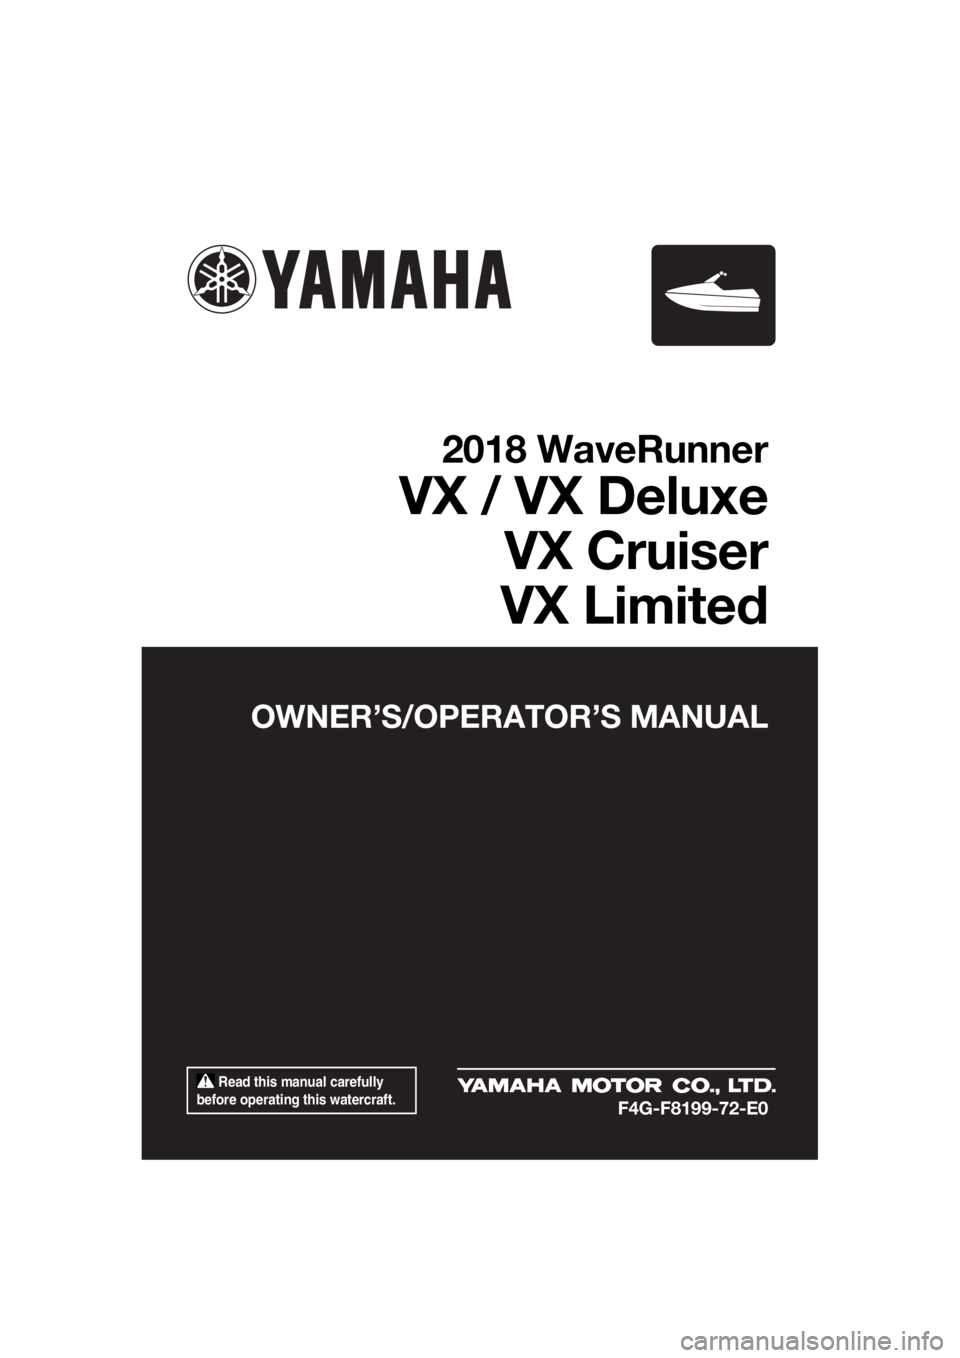 YAMAHA VX DELUXE 2018  Owners Manual  Read this manual carefully 
before operating this watercraft.
OWNER’S/OPERATOR’S MANUAL
2018 WaveRunner
VX / VX Deluxe
VX Cruiser
VX Limited
F4G-F8199-72-E0
UF4G72E0.book  Page 1  Tuesday, August